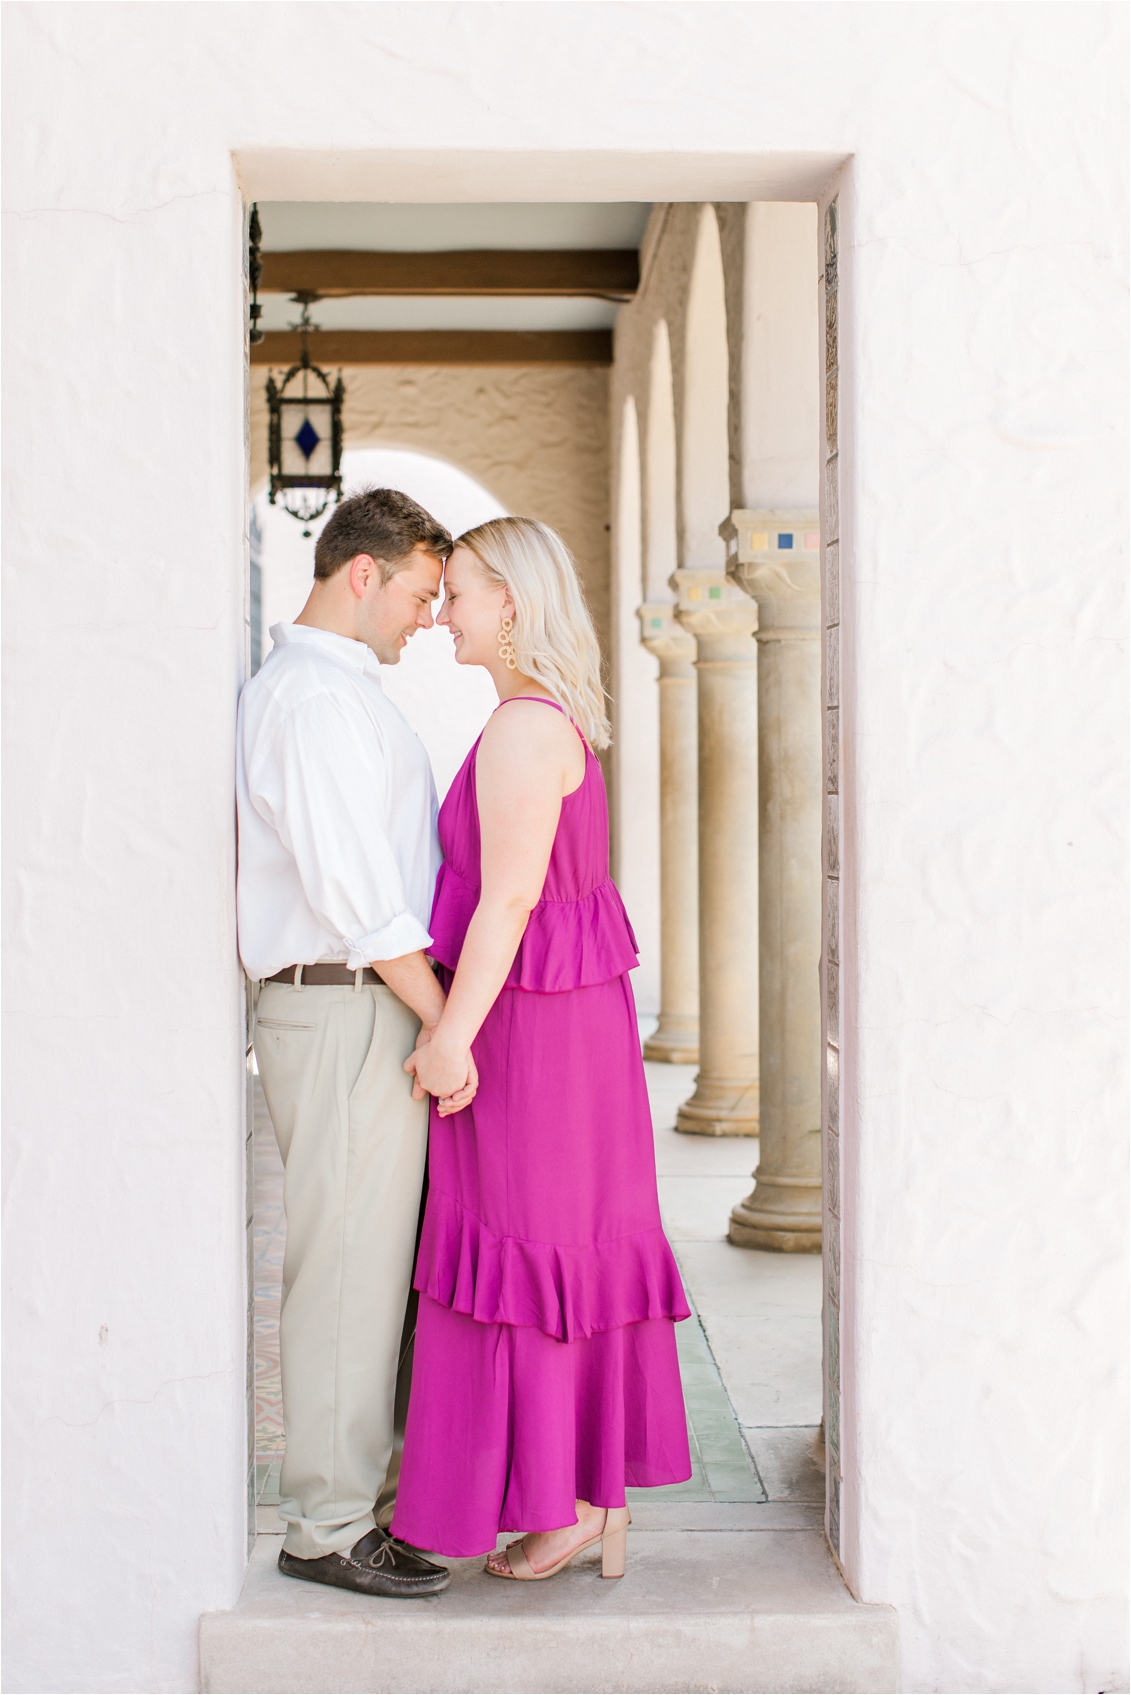 San Antonio Engagement Session Locations by Gaby Caskey Photography